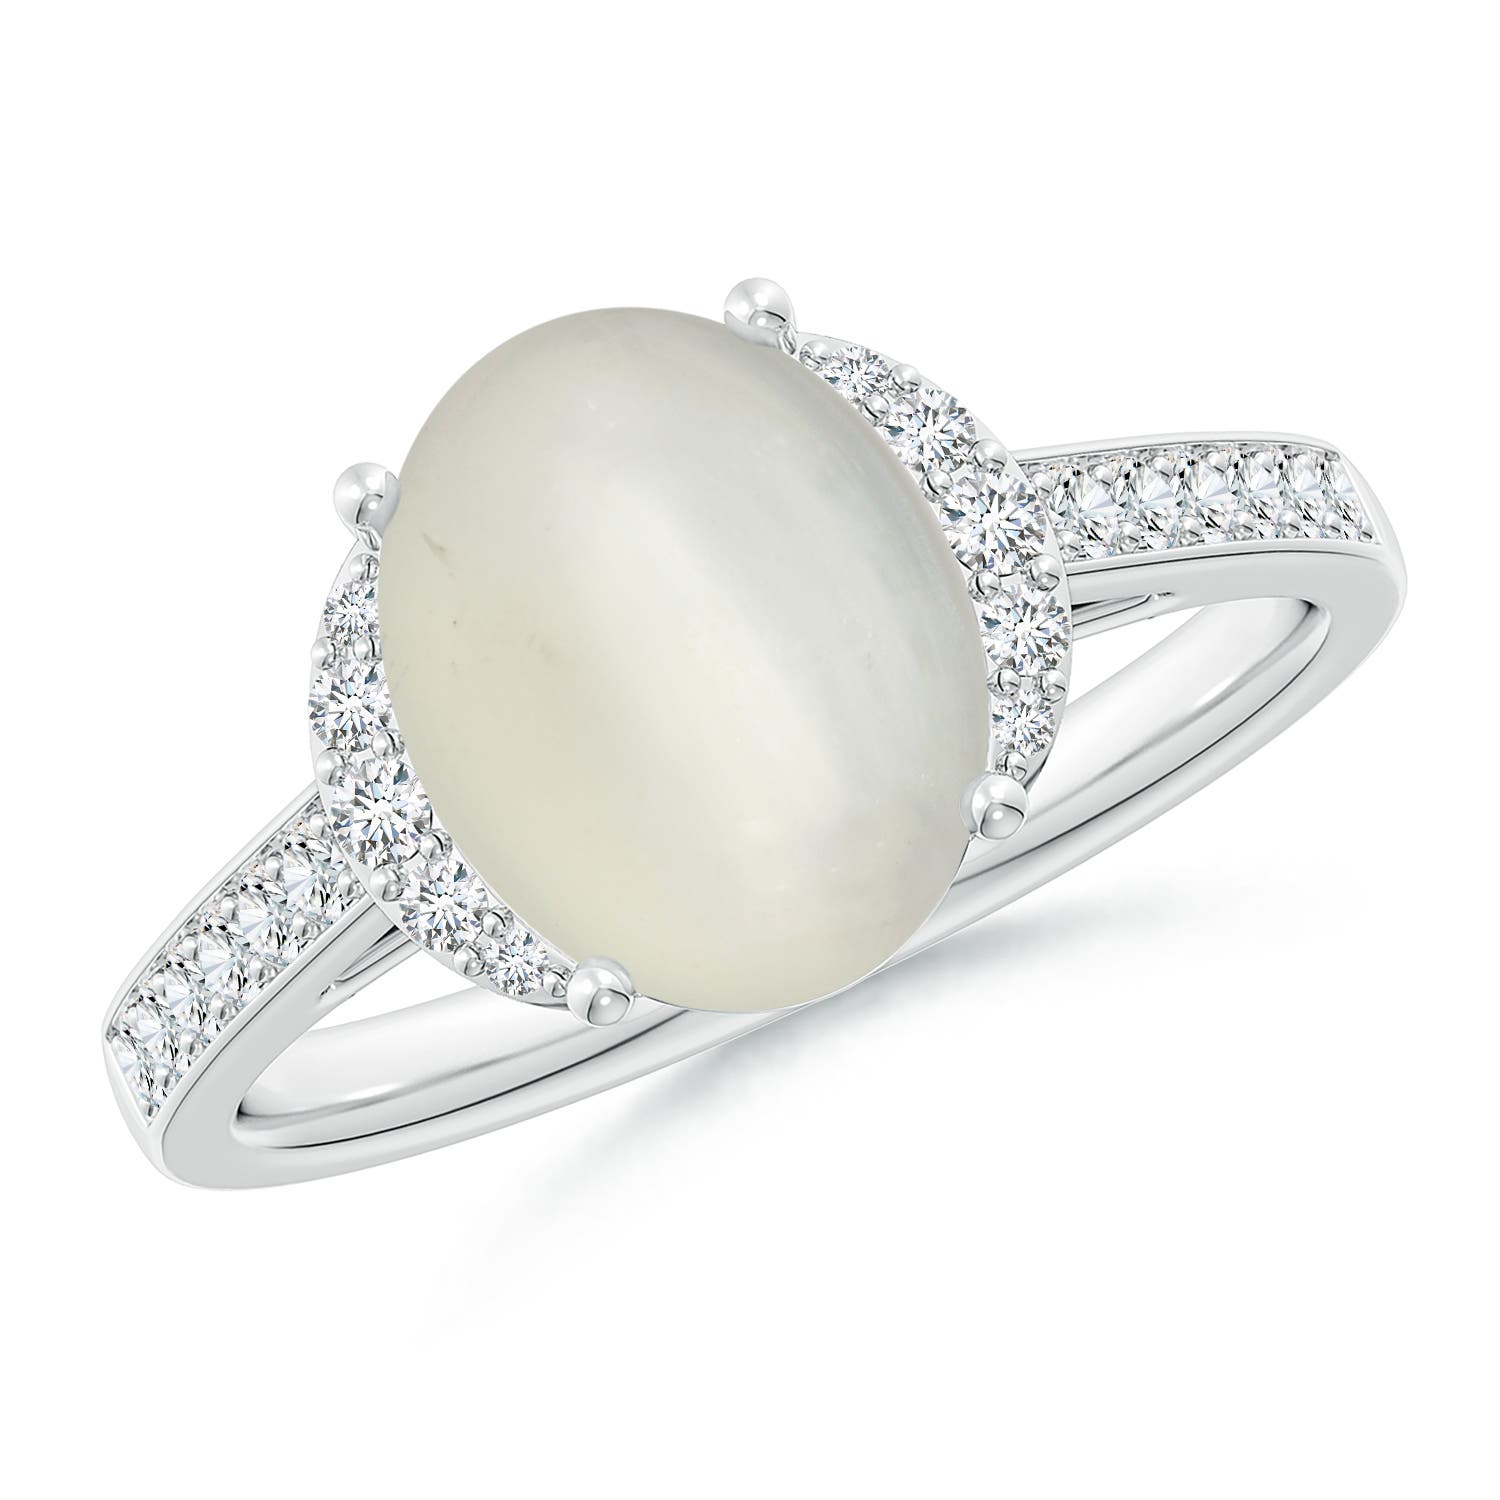 AAA - Moonstone / 2.75 CT / 14 KT White Gold